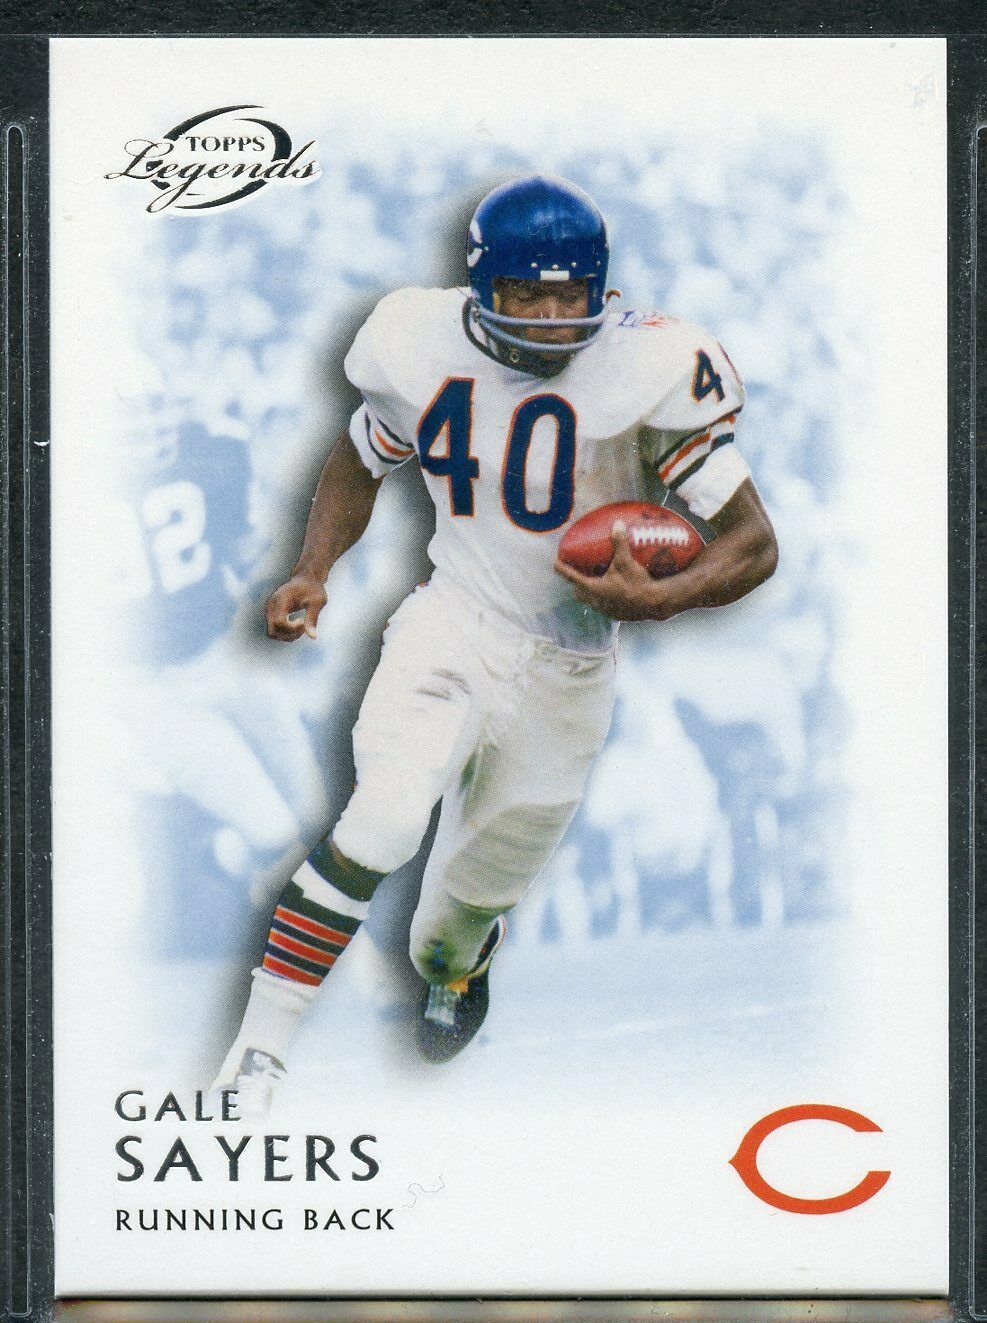 Gale Sayers 2011 Topps Legends BLUE Parallel Series Mint Card #160